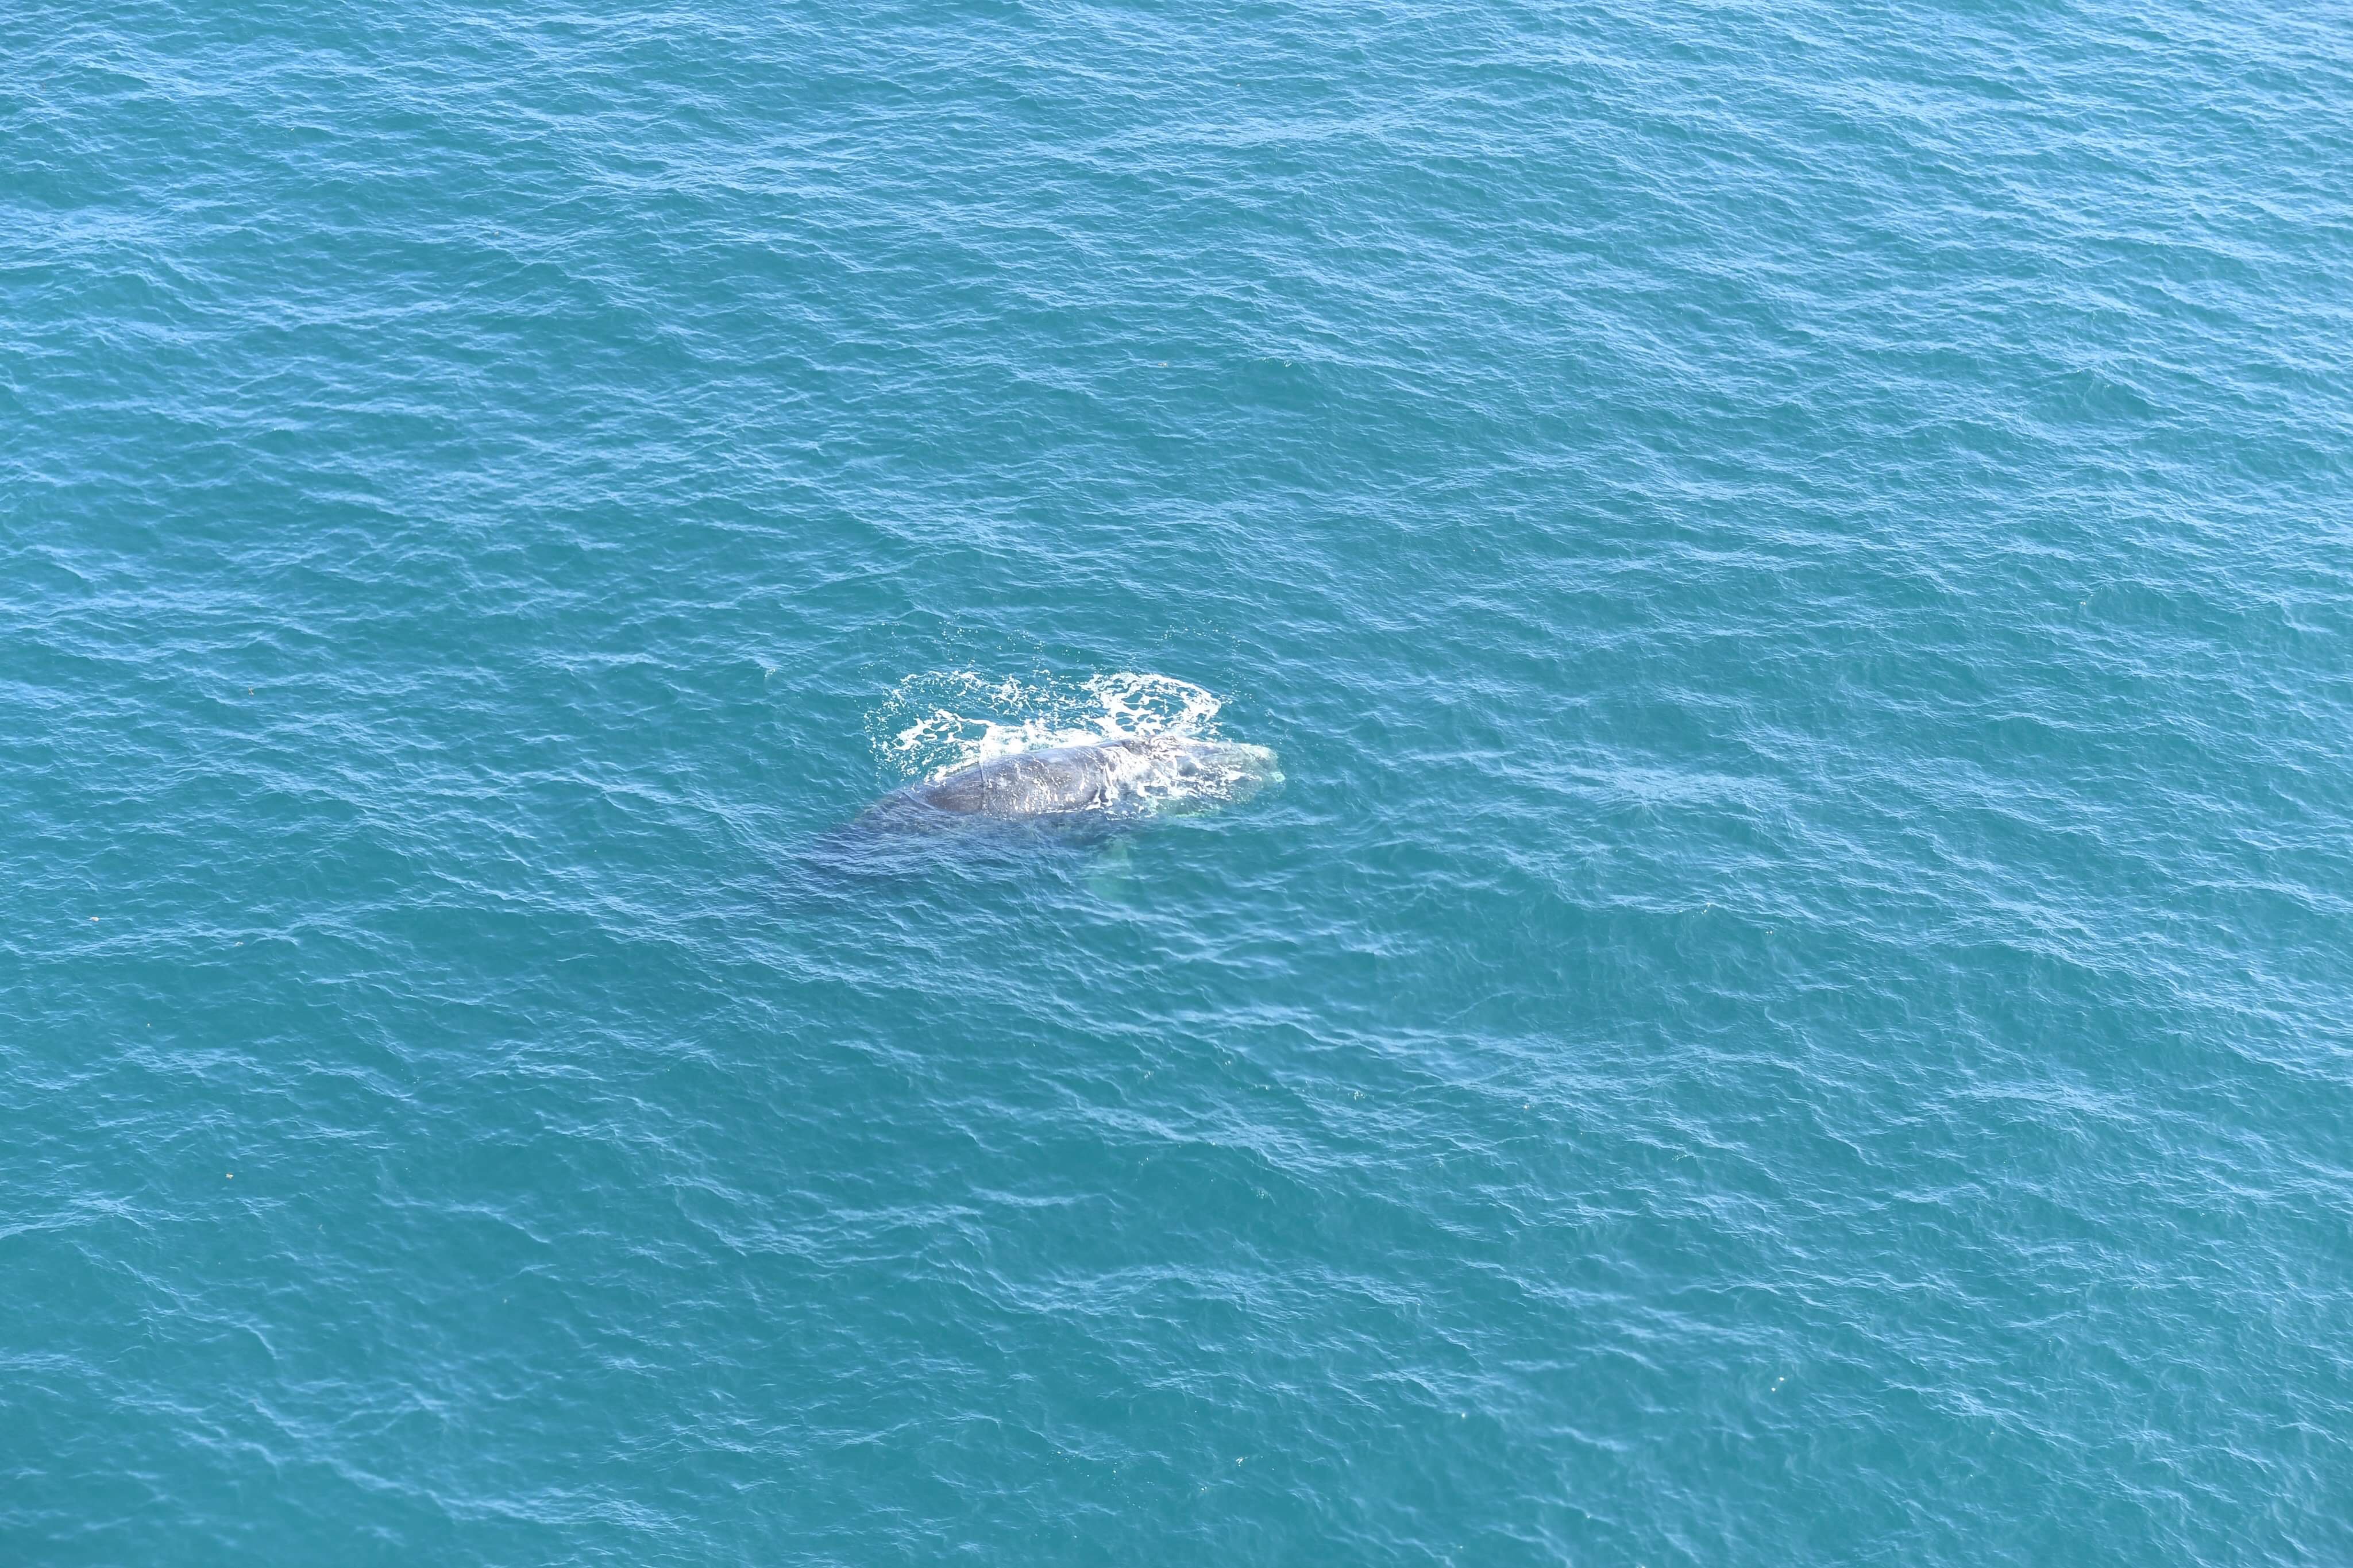 DFO Confirms Another Right Whale Entanglement Northeast of Magdalen Islands